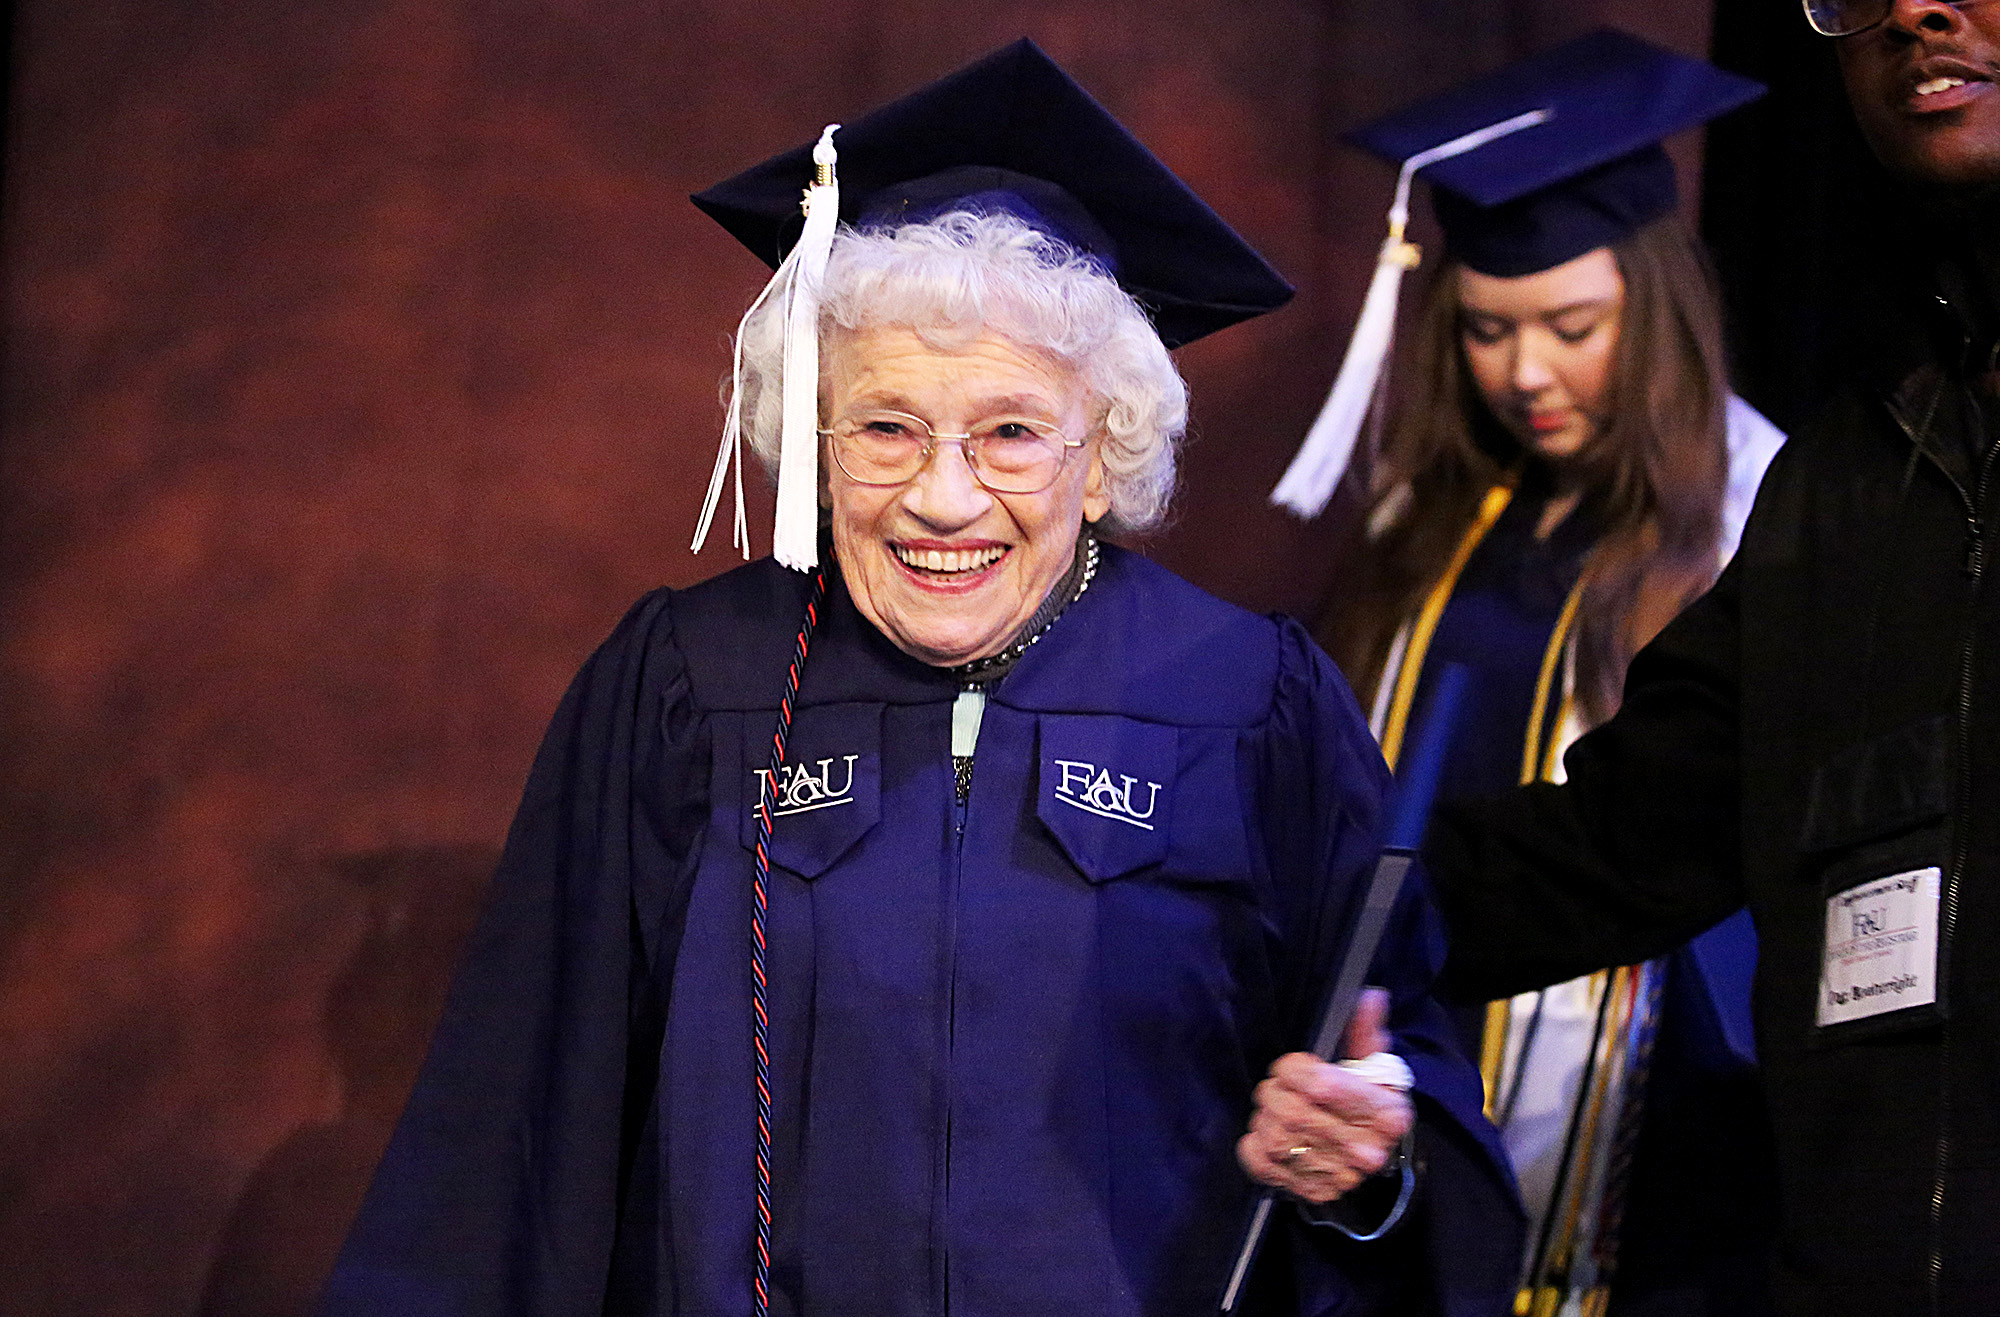 PHOTO: Betty Reilly walks across the stage at Florida Atlantic University to receive a Bachelor of Arts degree in English, Dec. 10, 2015 in Boca Raton, Fla. 